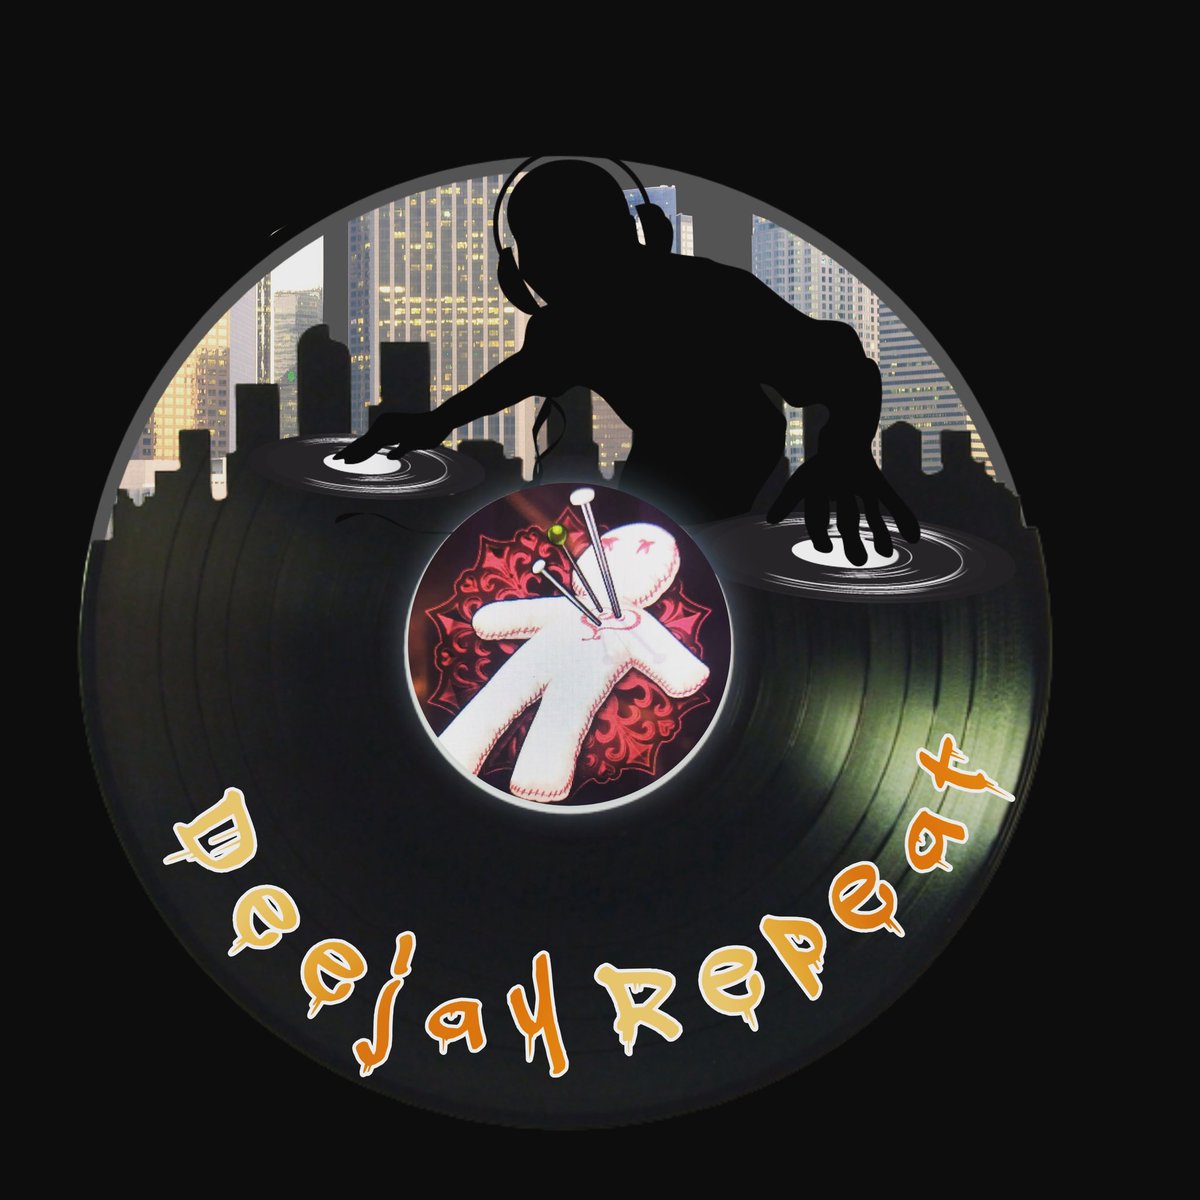 New deejay repeat logo for Las Vegas Worldwide Online DJs performances 2023.  Stay tuned on YOUTUBE & TWITCH #dj #LasVegas #lasvegasstrip #PartyWithThabang #lvbpxmtv #Philippines #nyc #nycdj #WorldwideiTunesSongchart #deejayrepeat #Dance #80smusic #90sMusic #twitch